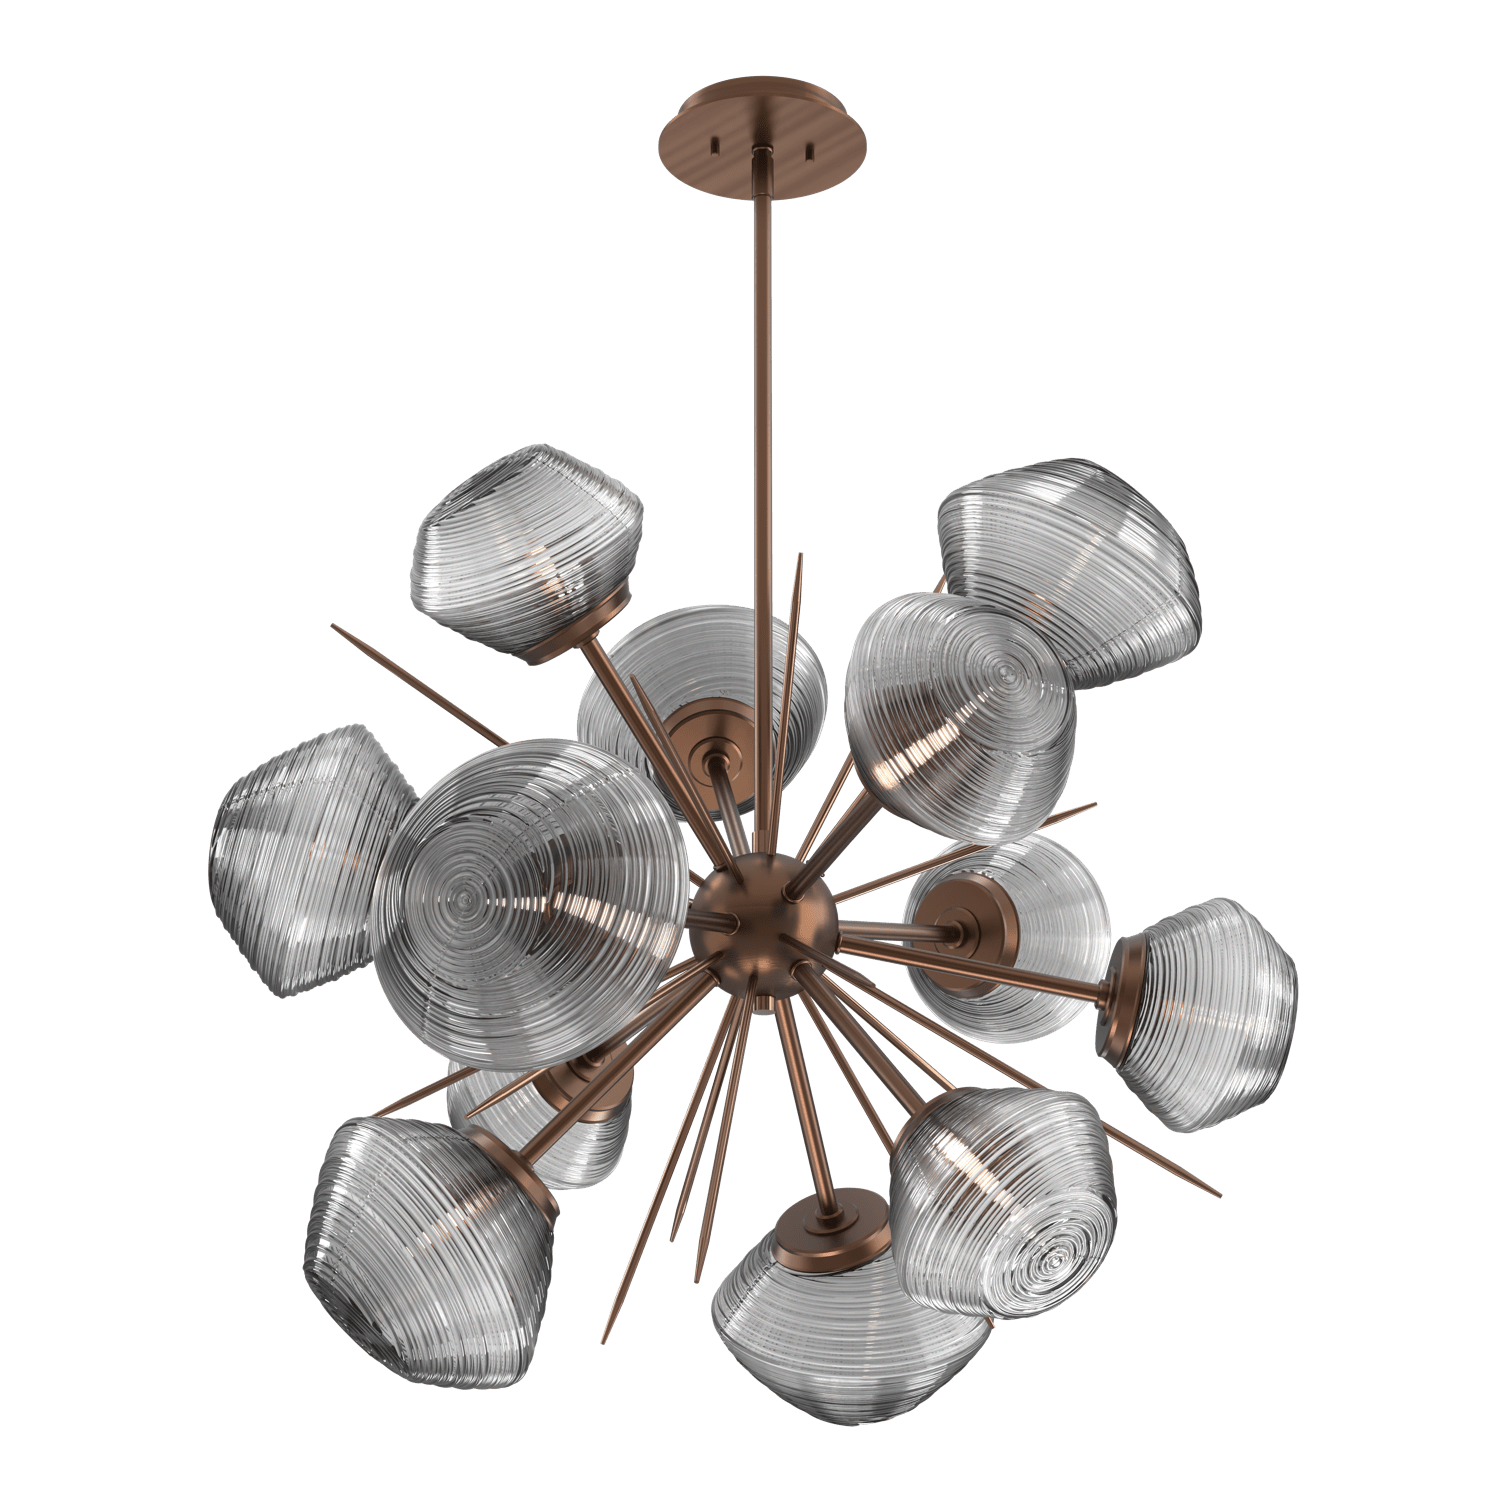 CHB0089-0G-RB-S-Hammerton-Studio-Mesa-36-inch-starburst-chandelier-with-oil-rubbed-bronze-finish-and-smoke-blown-glass-shades-and-LED-lamping